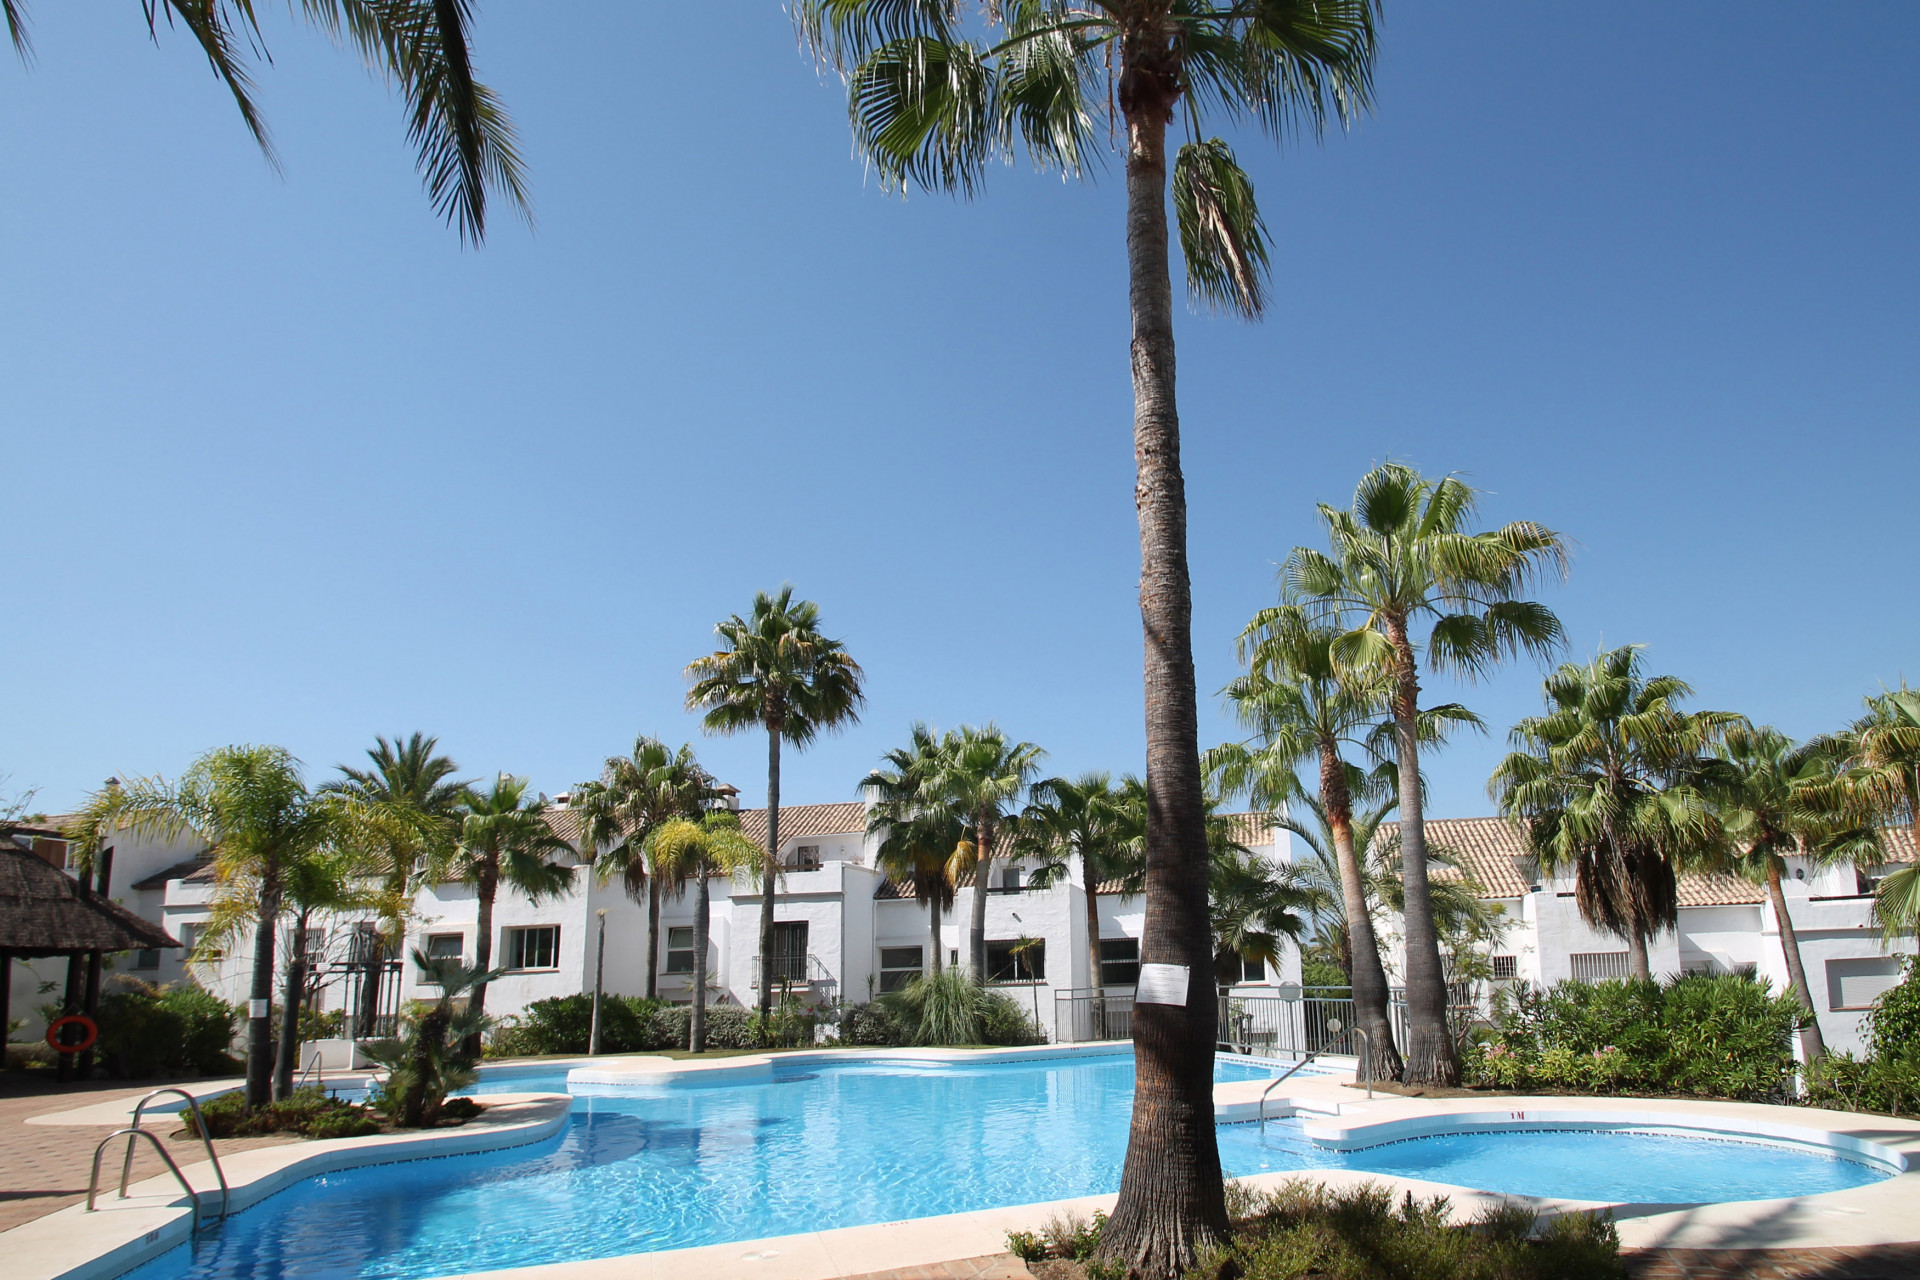 Four bedroom townhouse in a tranquil area on Marbella's Golden Mile